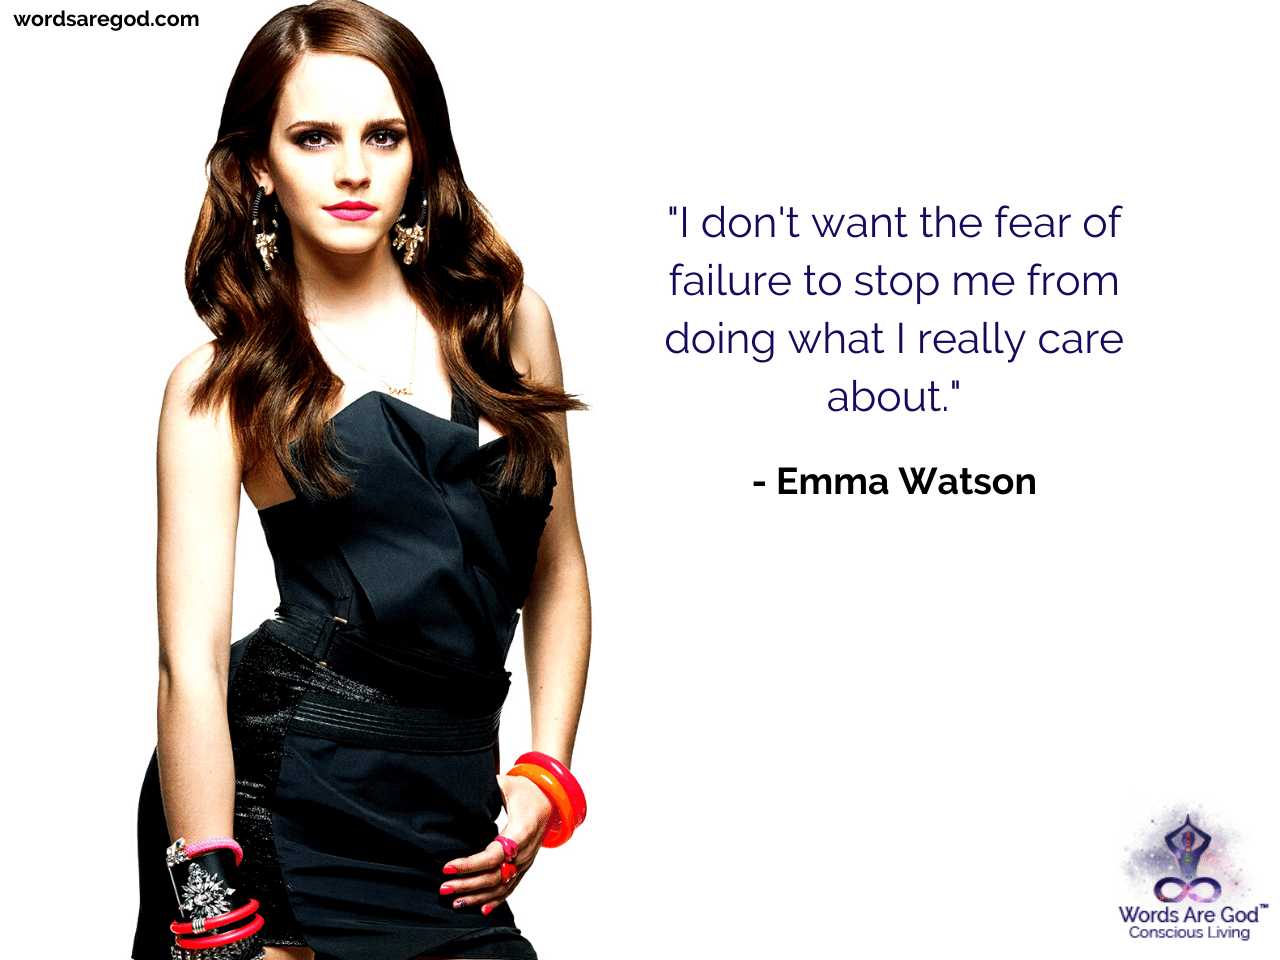 Emma Watson Quotes. Life Quotes With Image. Life Quotes With Love. Music Quotes For Dp